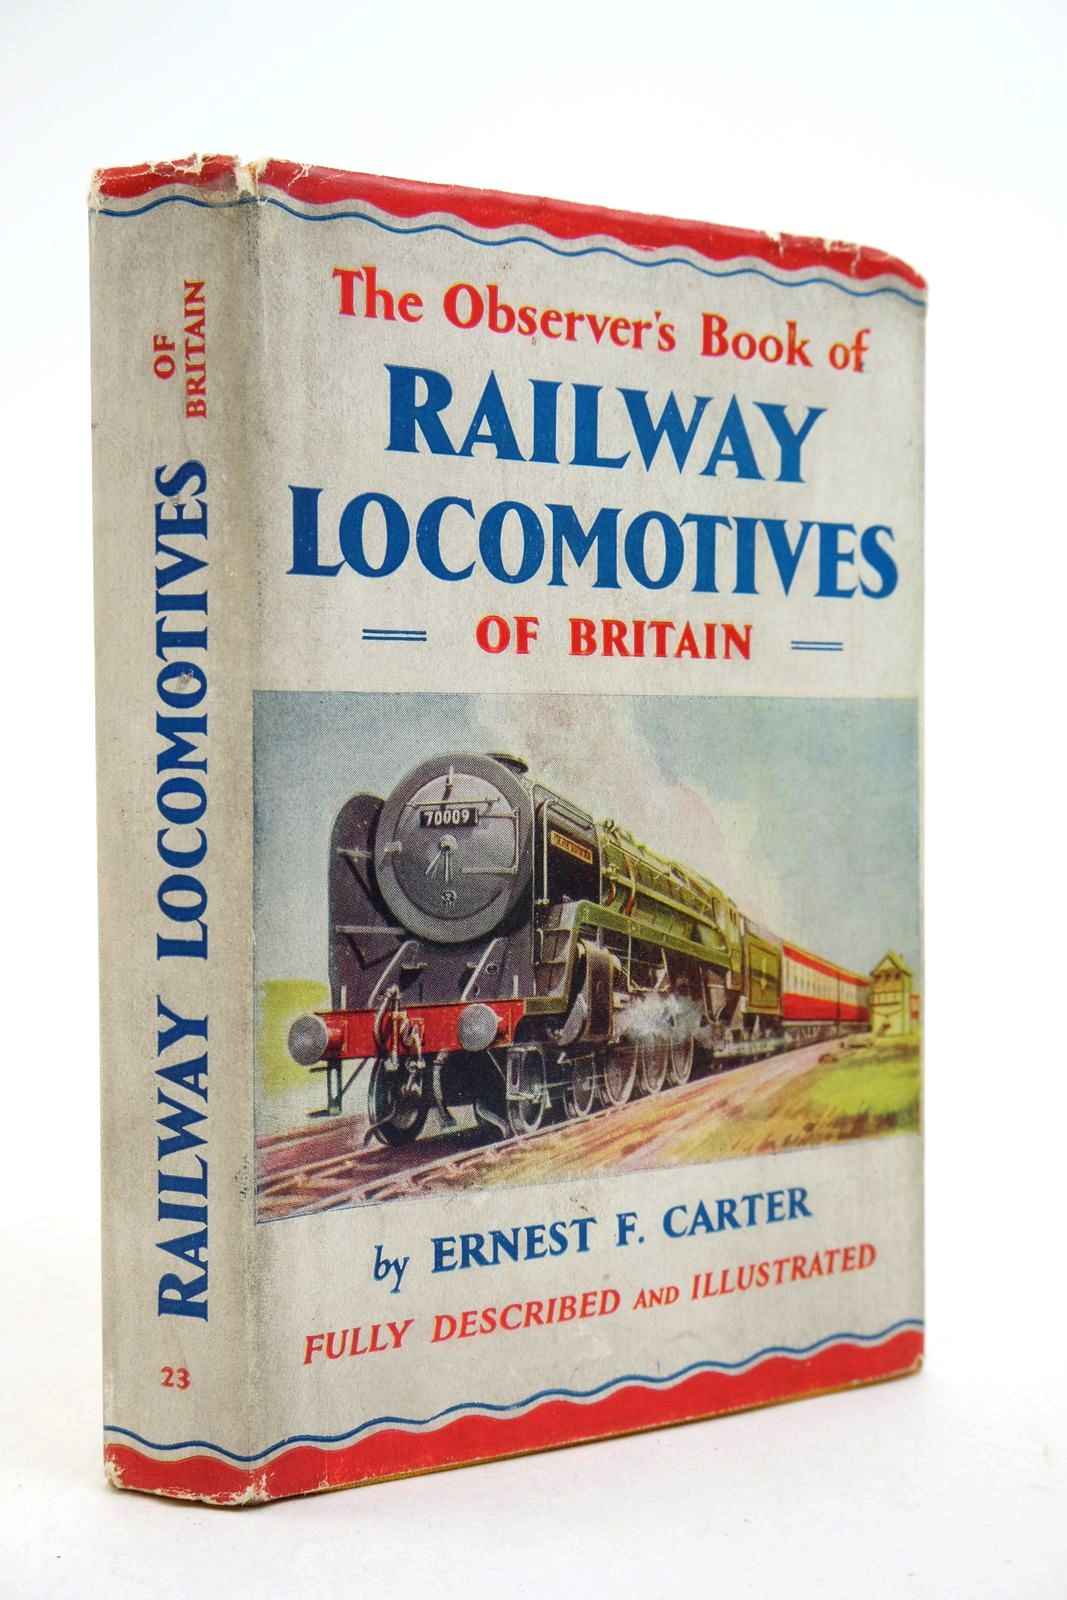 Photo of THE OBSERVER'S BOOK OF RAILWAY LOCOMOTIVES OF BRITAIN written by Carter, Ernest F. illustrated by Carter, Kenneth E. published by Frederick Warne & Co Ltd. (STOCK CODE: 2140311)  for sale by Stella & Rose's Books